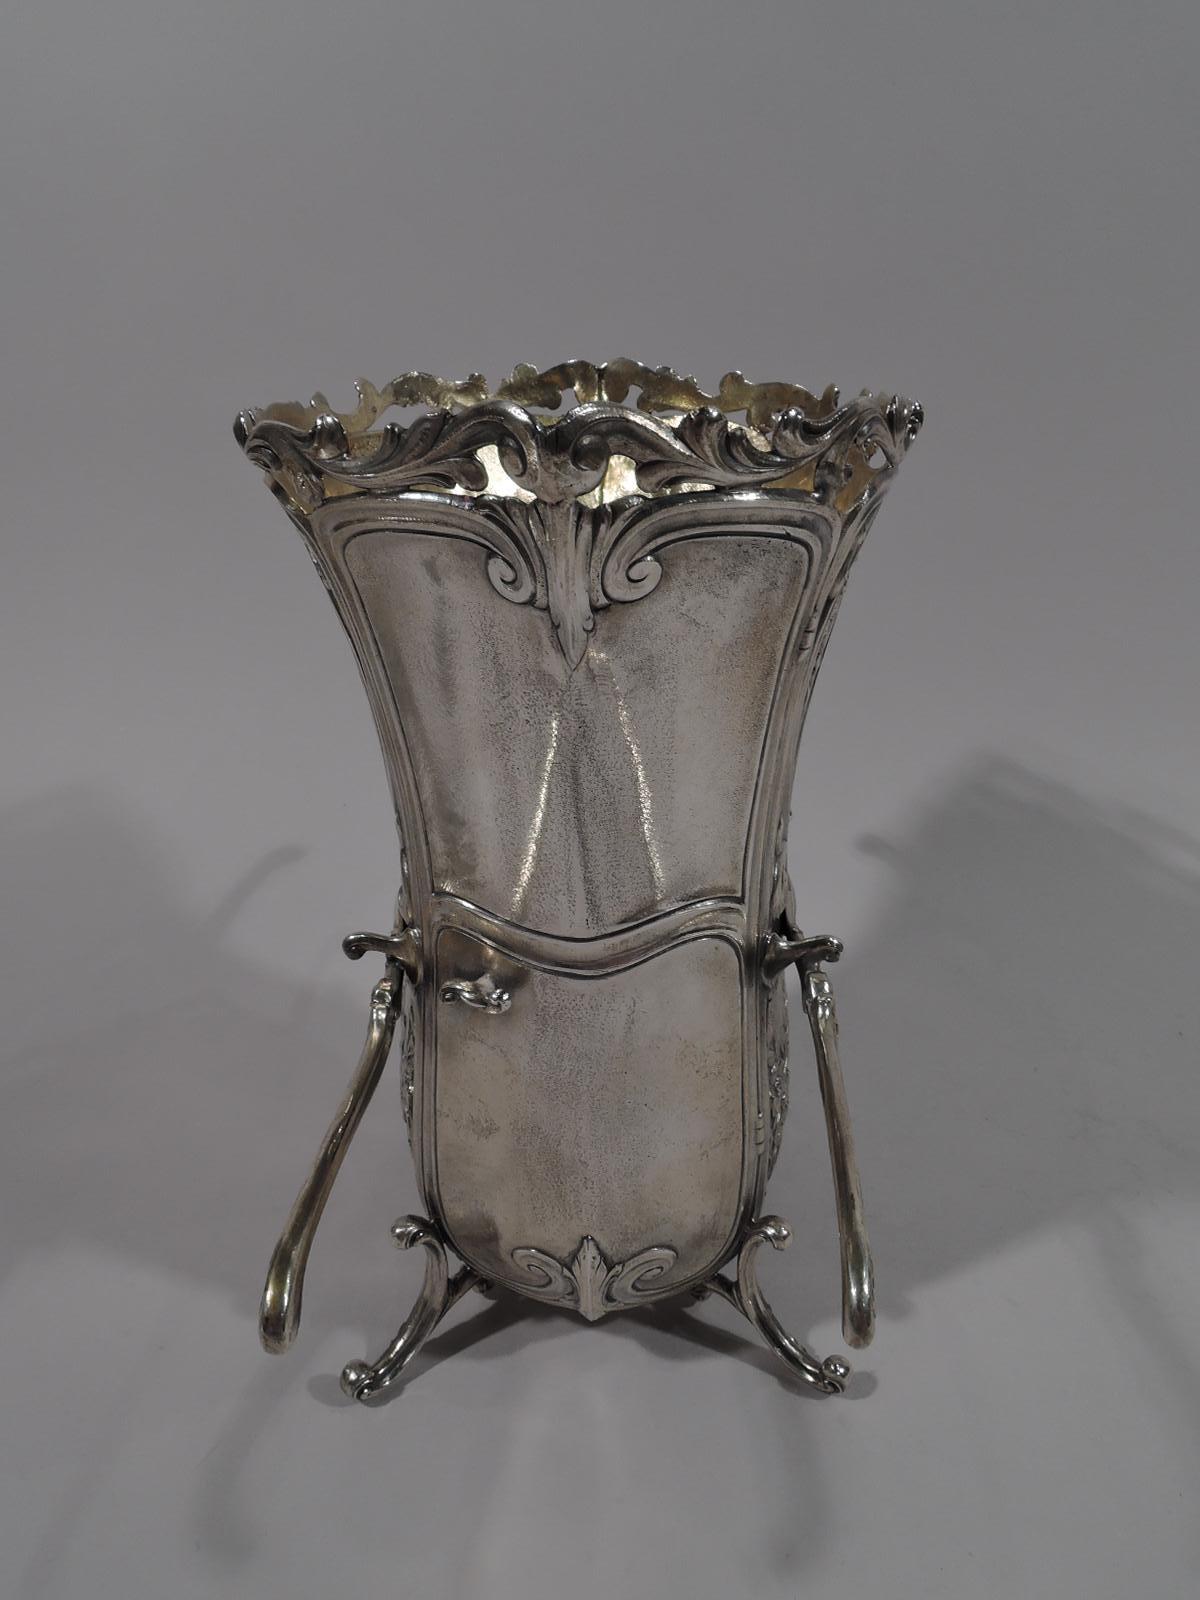 Rococo Revival sterling silver sedan chair vase. Made by Durgin (part of Gorham) in Providence in 1931. Deep and ovalish with applied open scrolled rim. Chased flowers and oval rondels inset with heads of olden-days belles in scrolled frames with